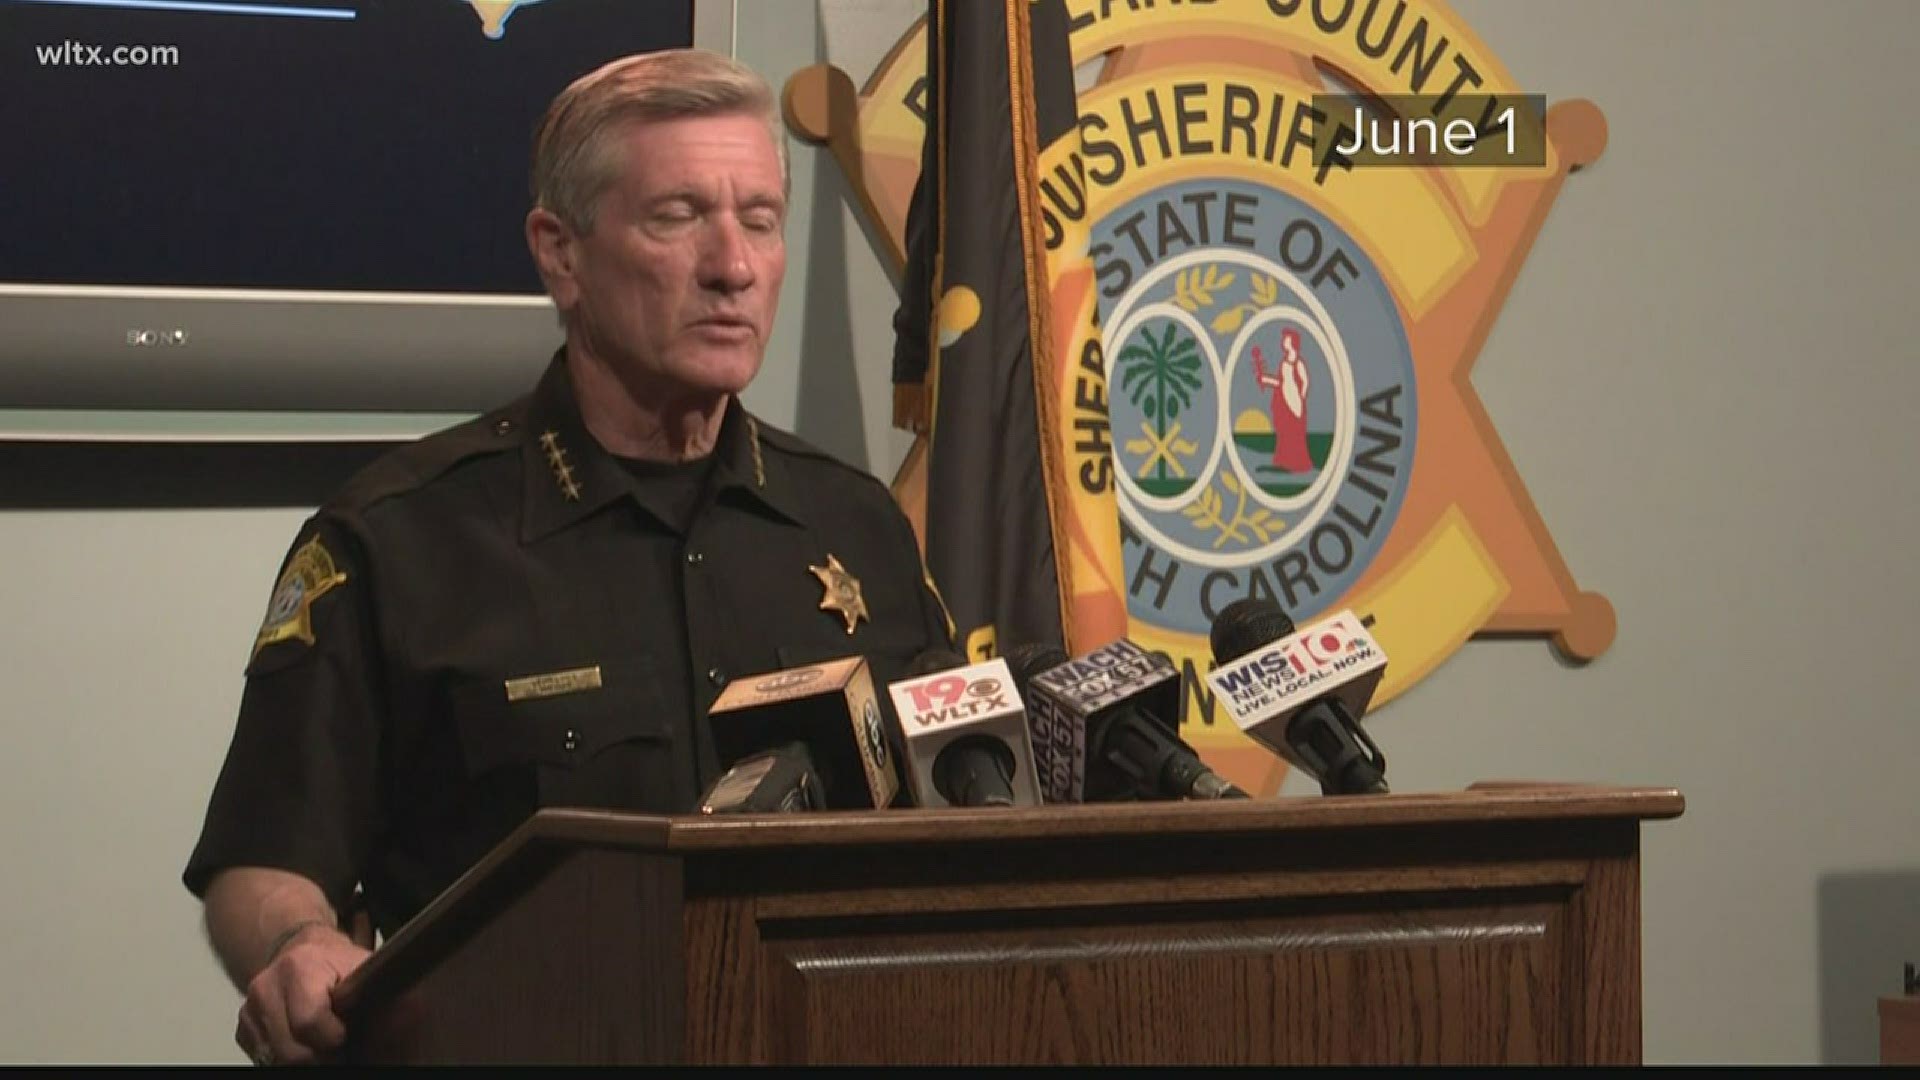 Richland Sheriff Leon Lott addressed police reforms which have been sparked by protests over the death of George Floyd